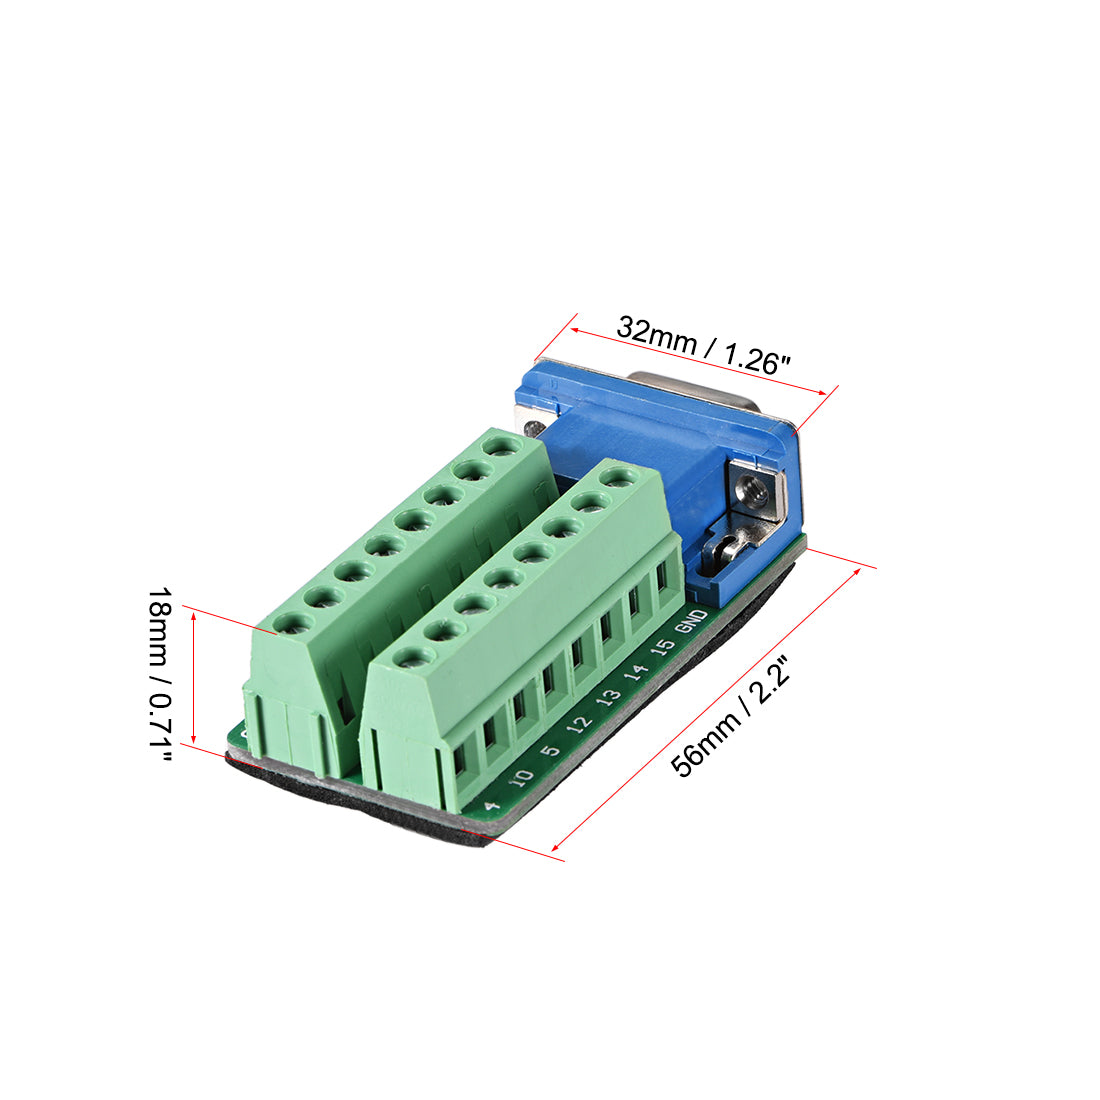 uxcell Uxcell D-sub DB15 Breakout Board Connector 15 Pin 3-row Female Port Solderless Terminal Block Adapter